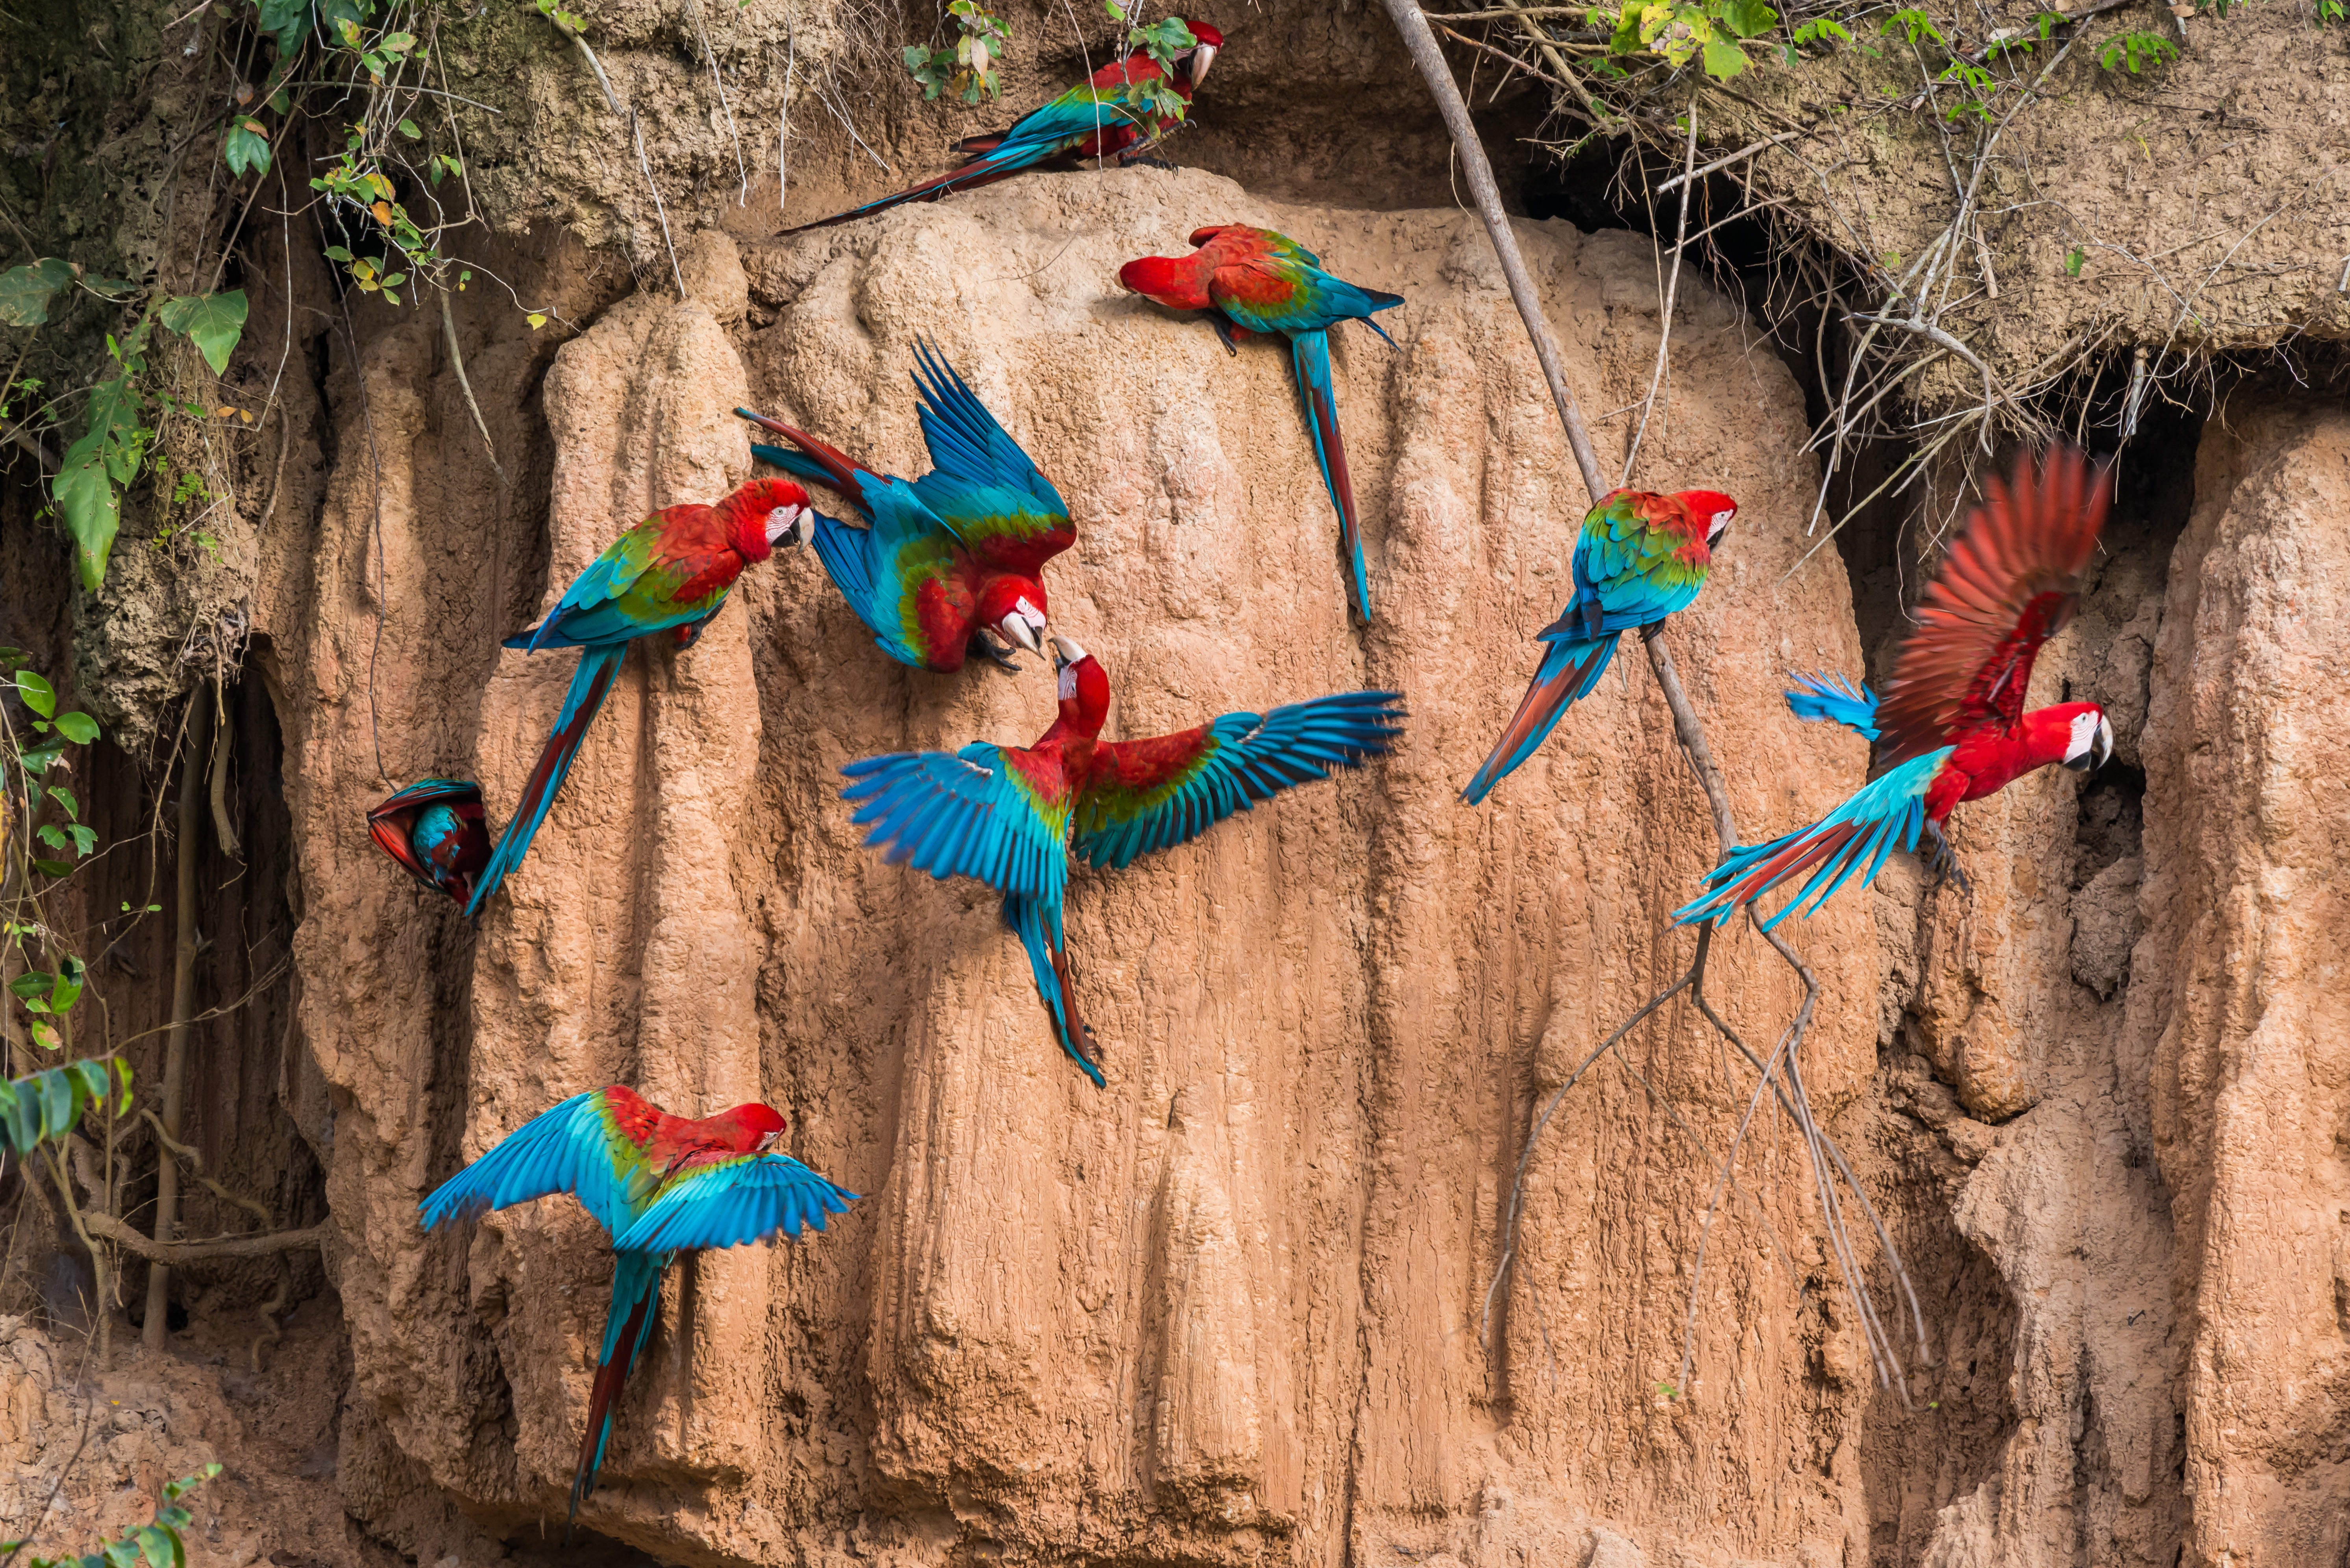 A group of scarlet macaws flock on the side of a rock wall